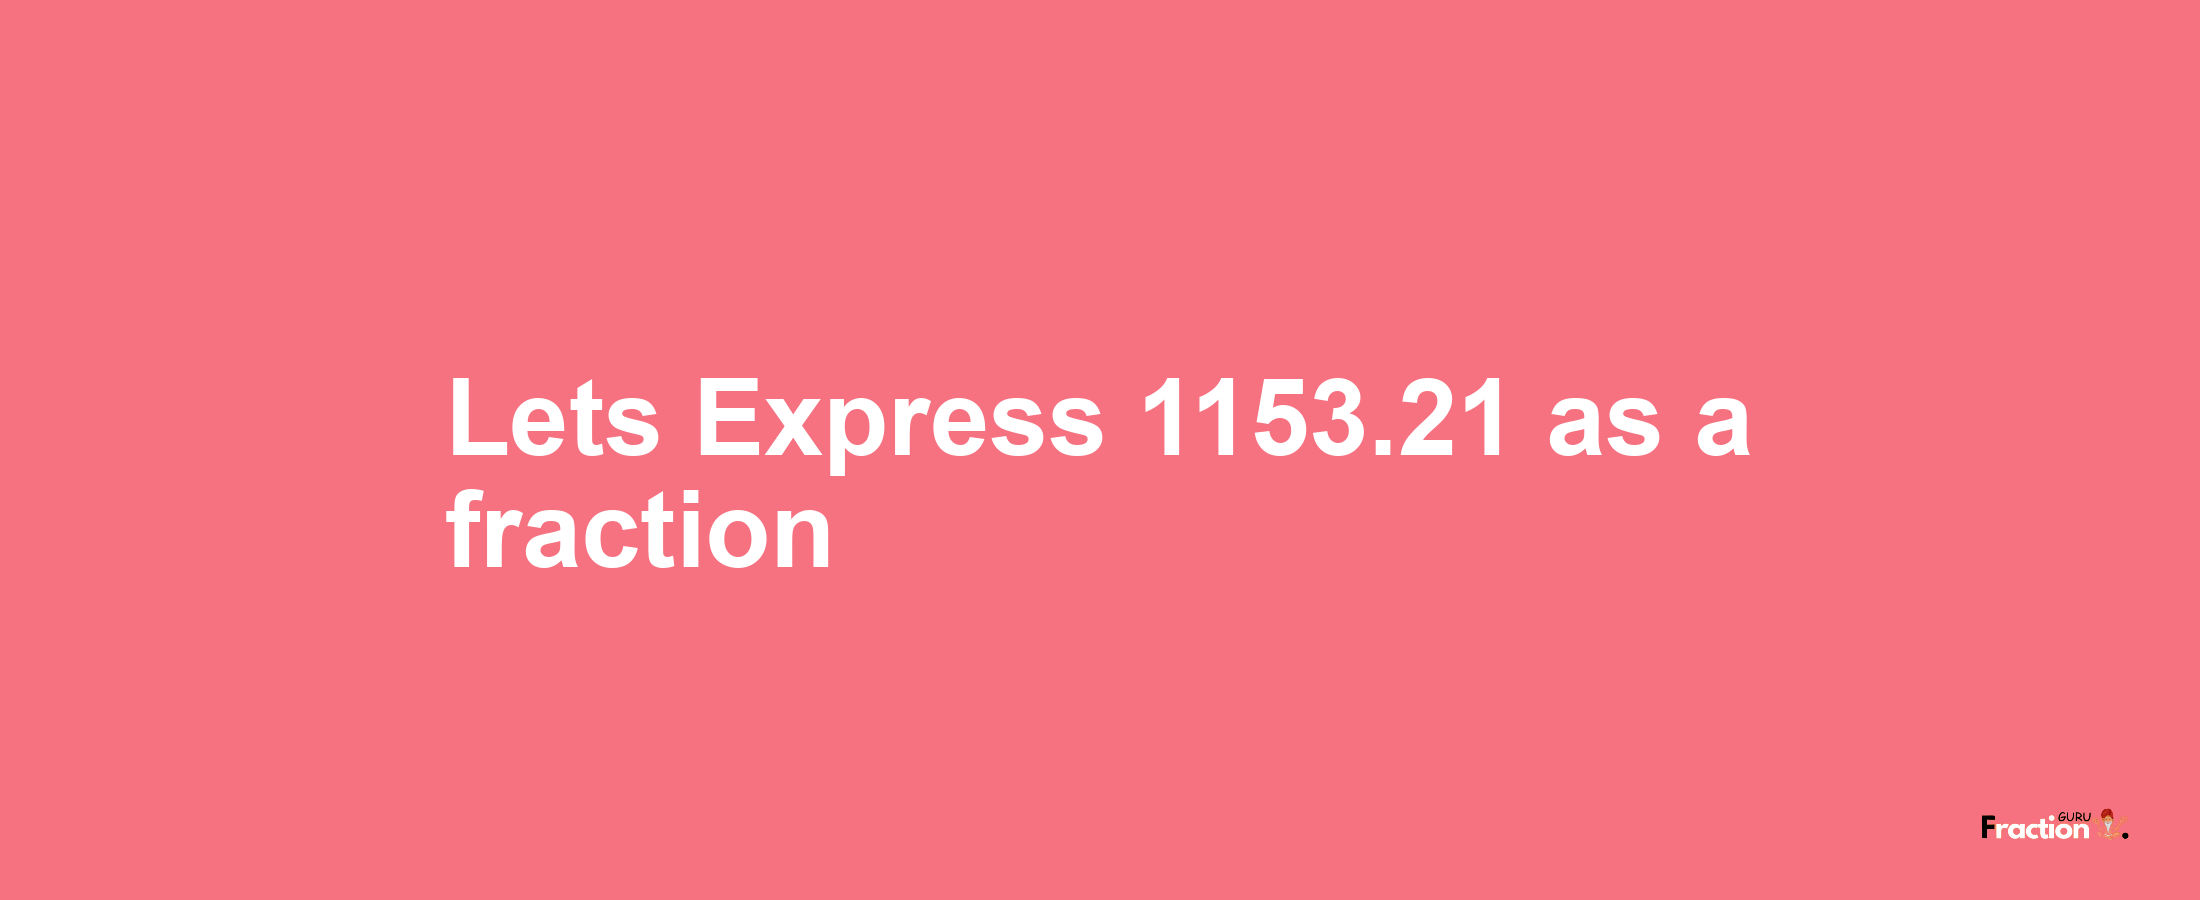 Lets Express 1153.21 as afraction